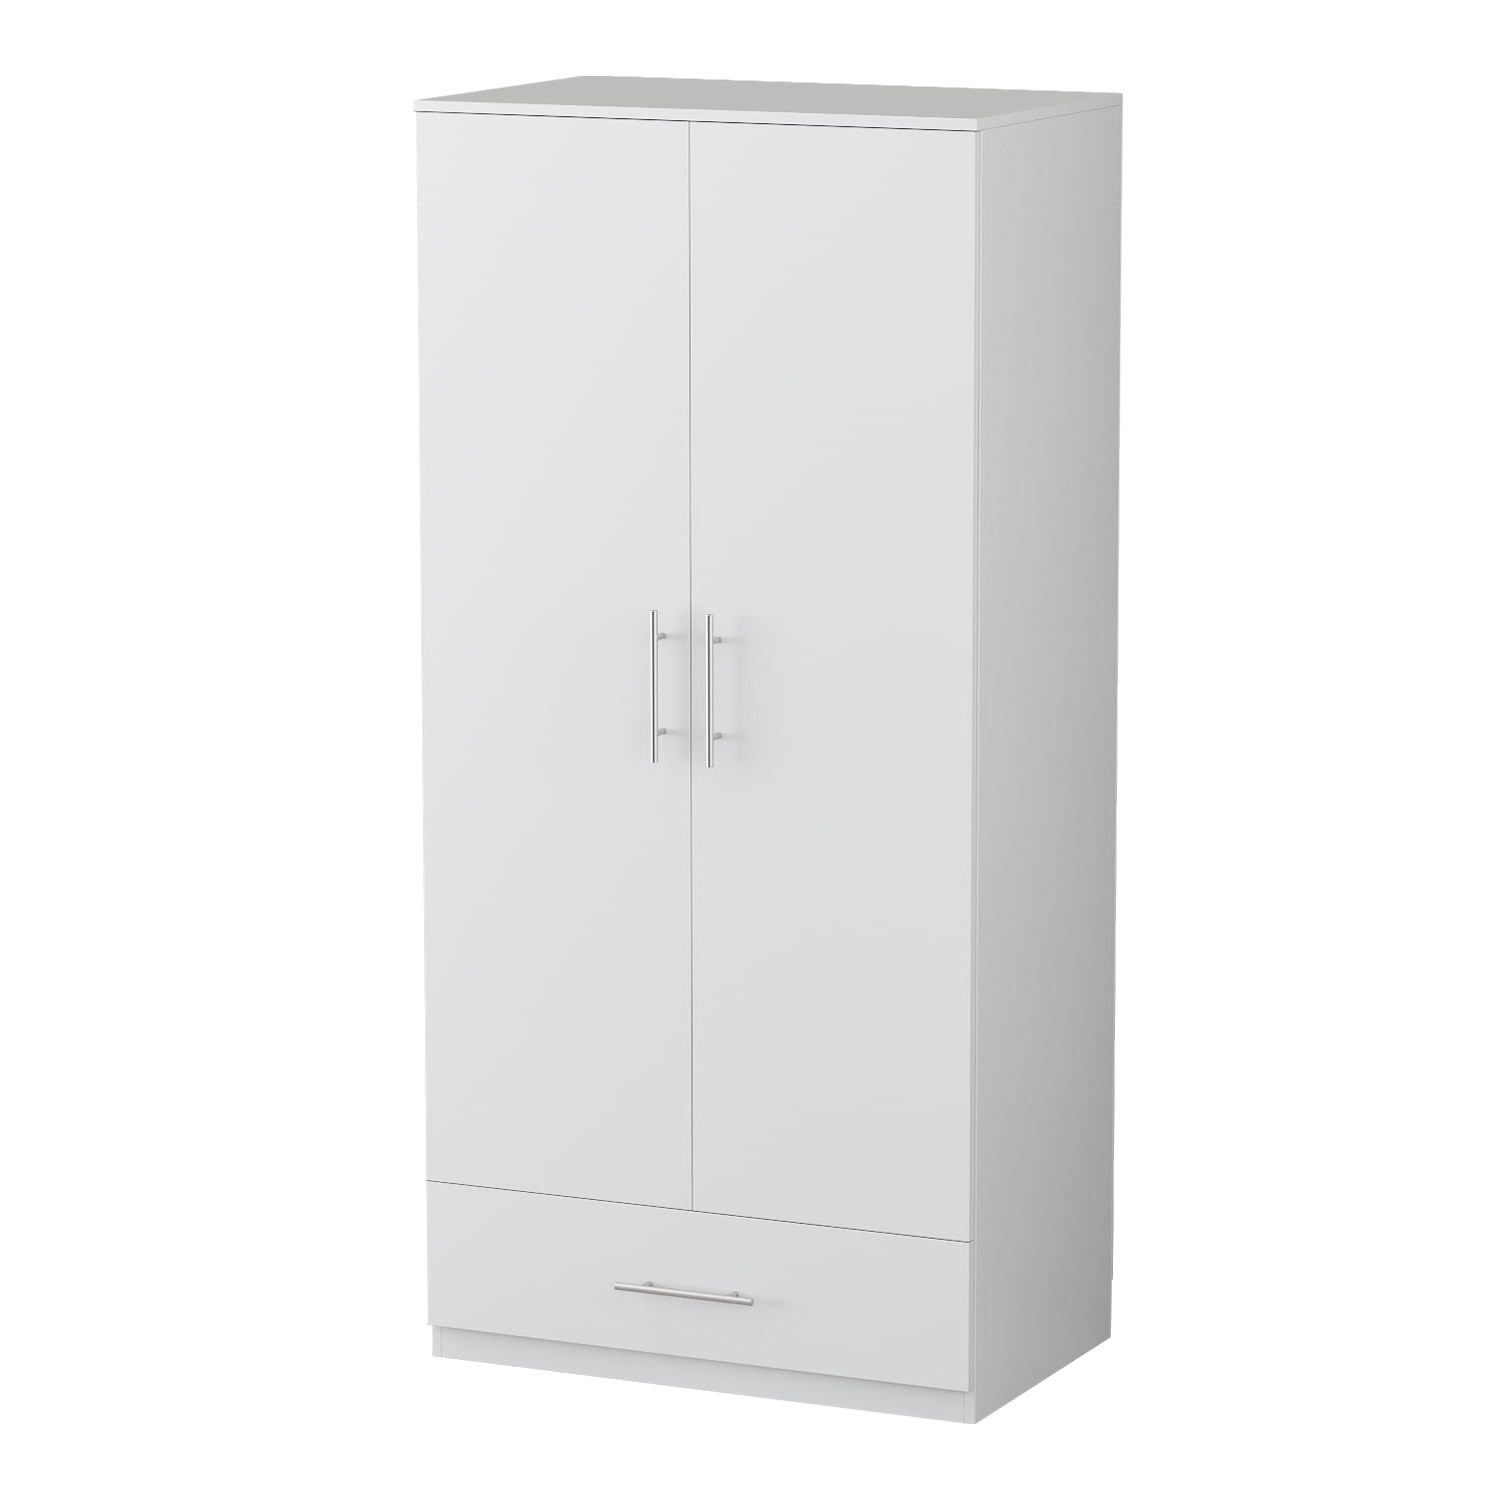 2 Door Armoire Wardrobe Cabinet With Drawer For Bedroom White – Walmart For Two Door White Wardrobes (Gallery 5 of 20)